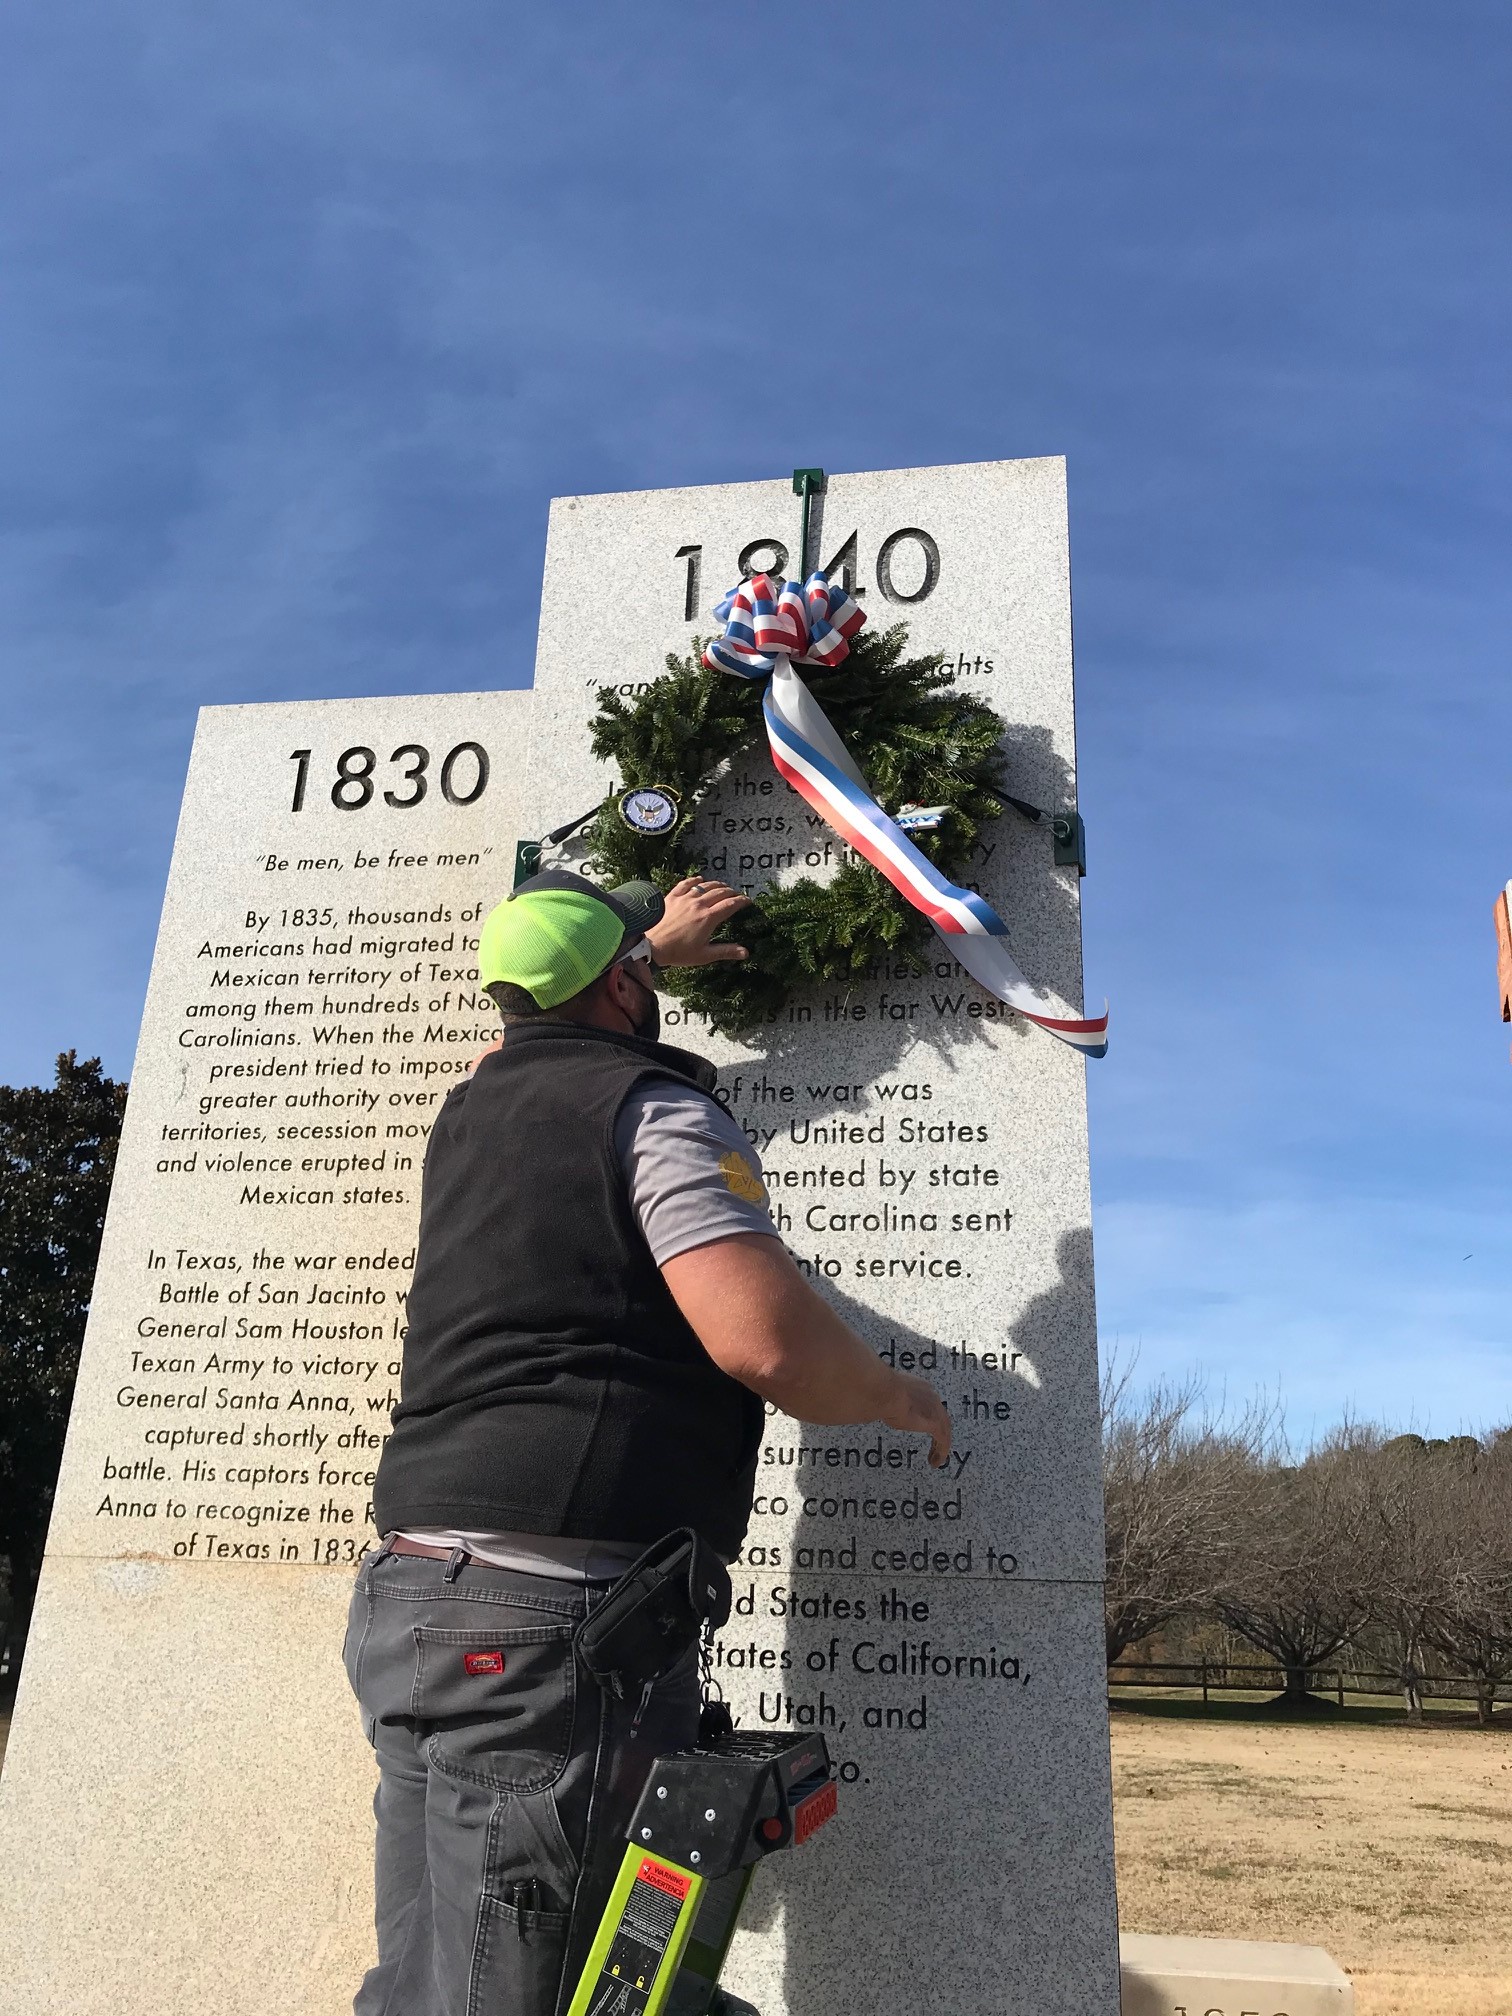 putting up the wreath